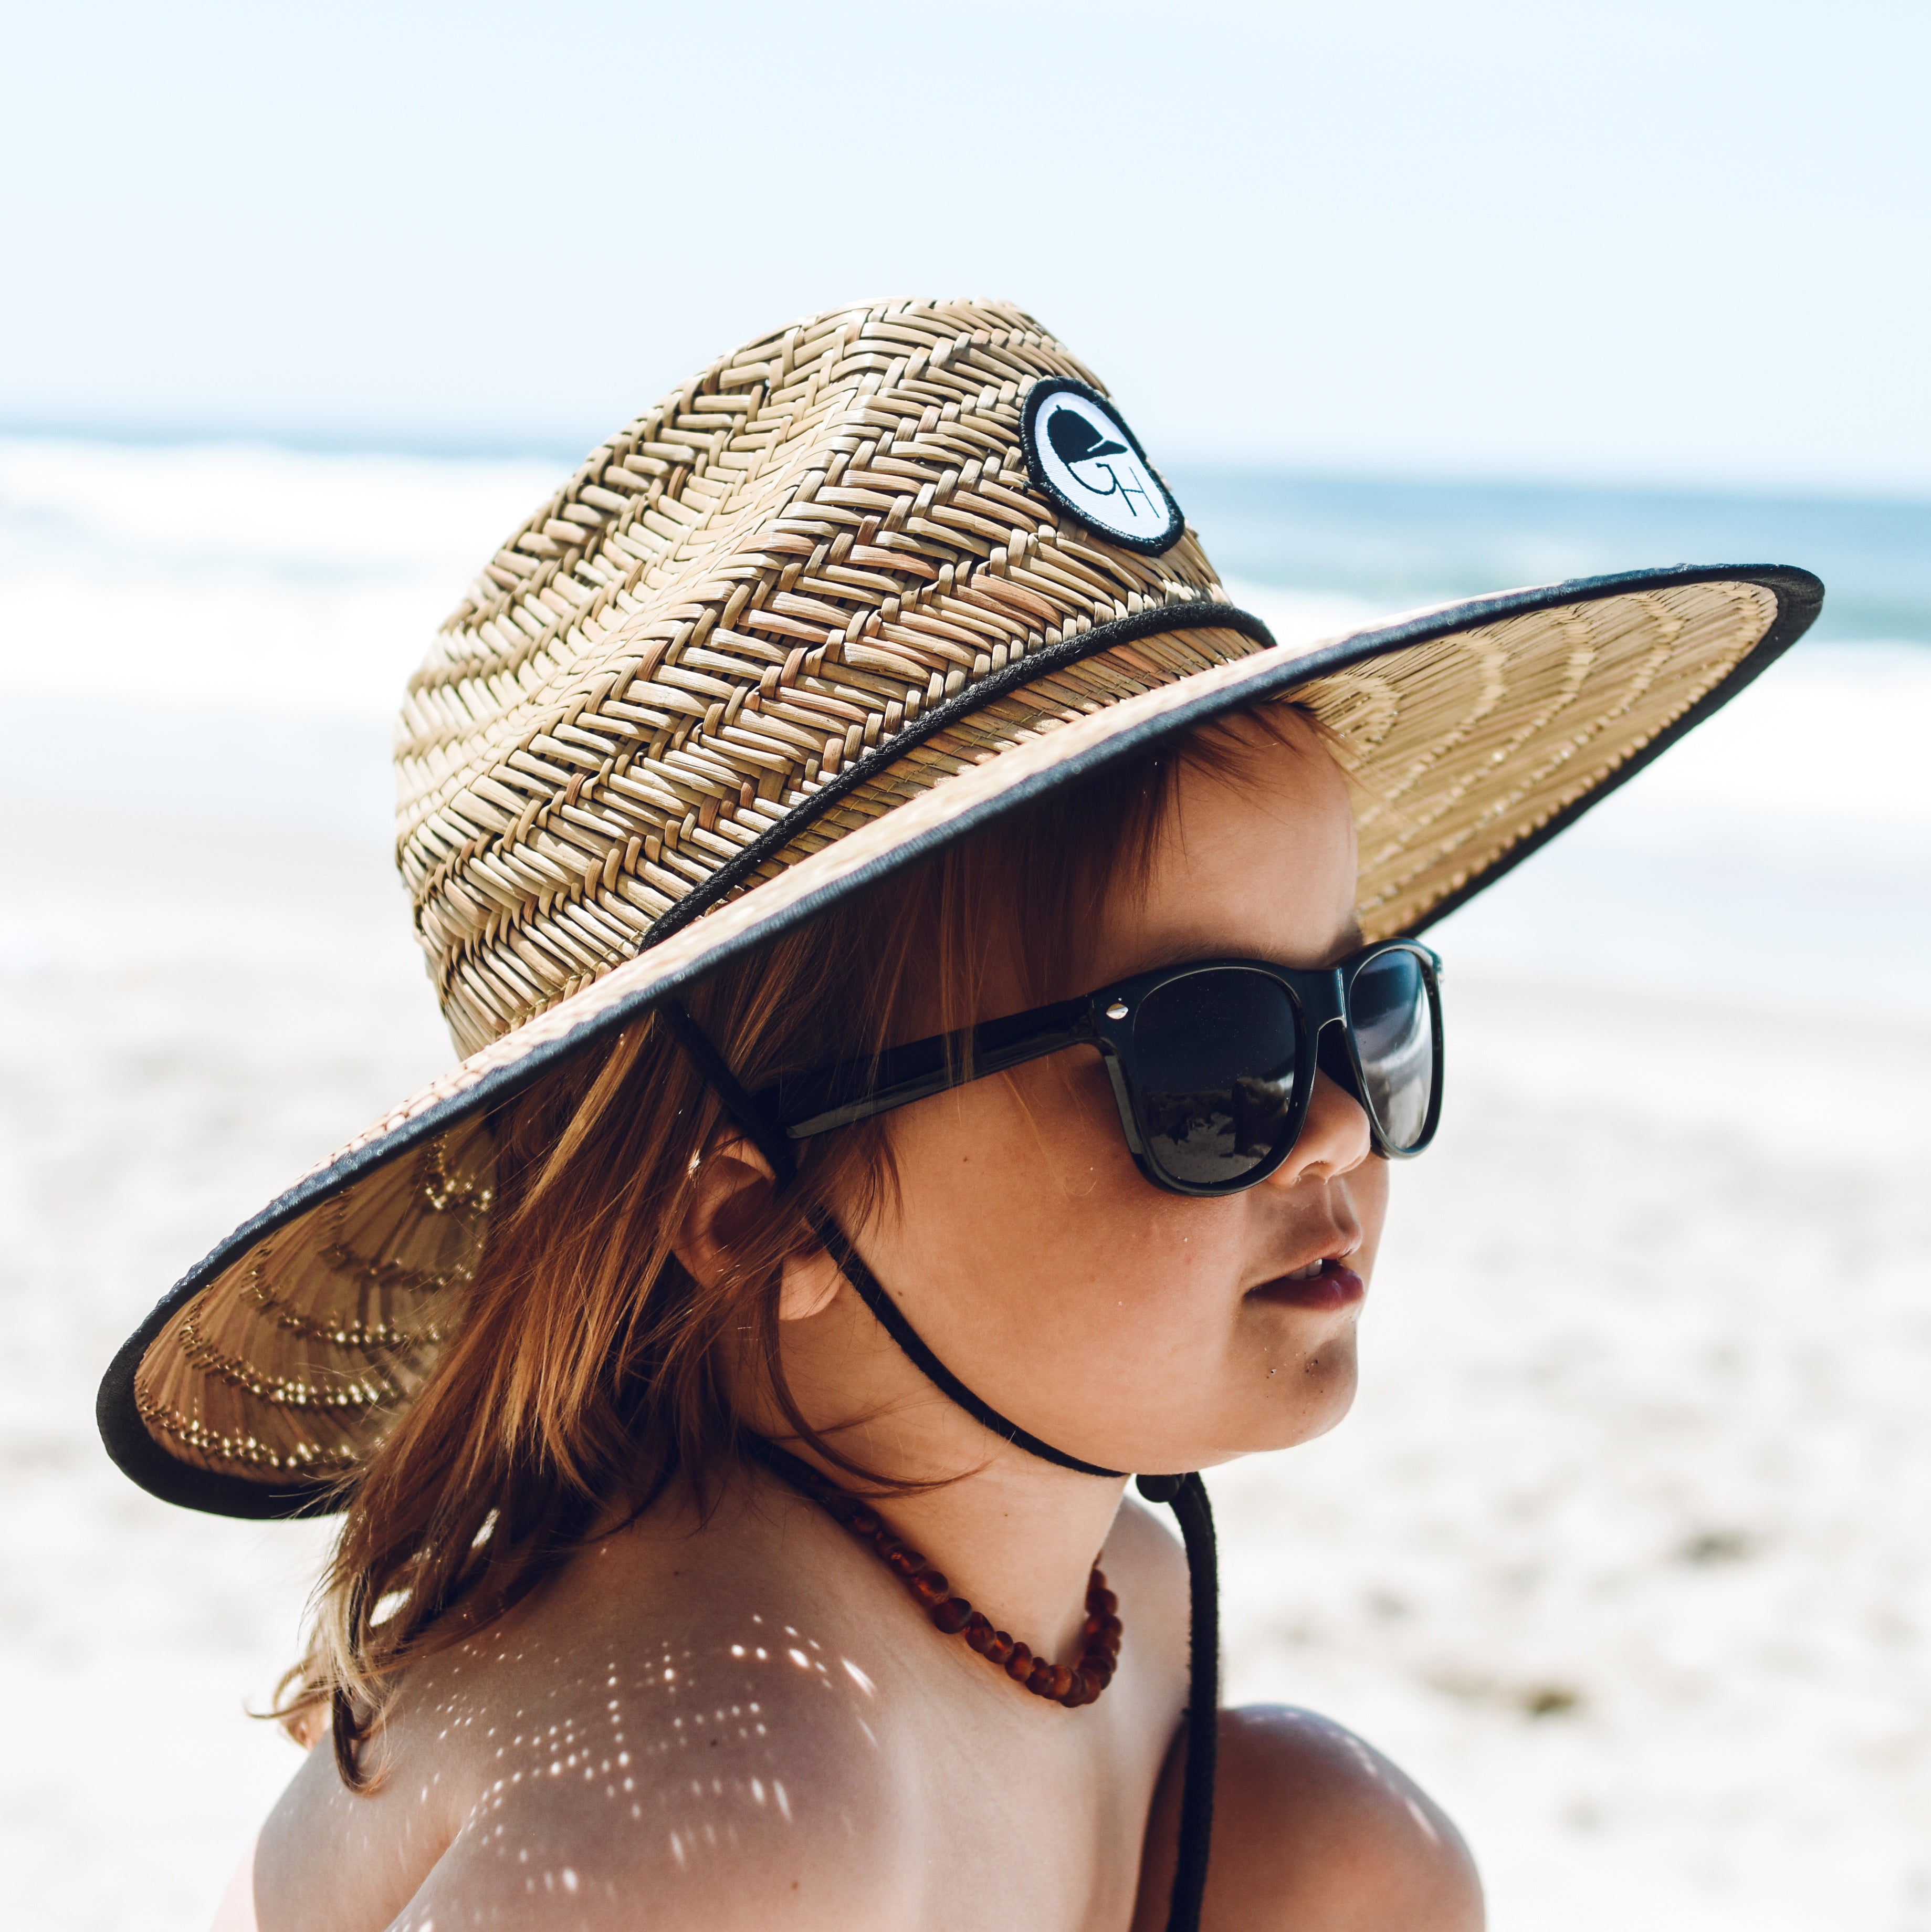 Classic Straw Hat from George Hats